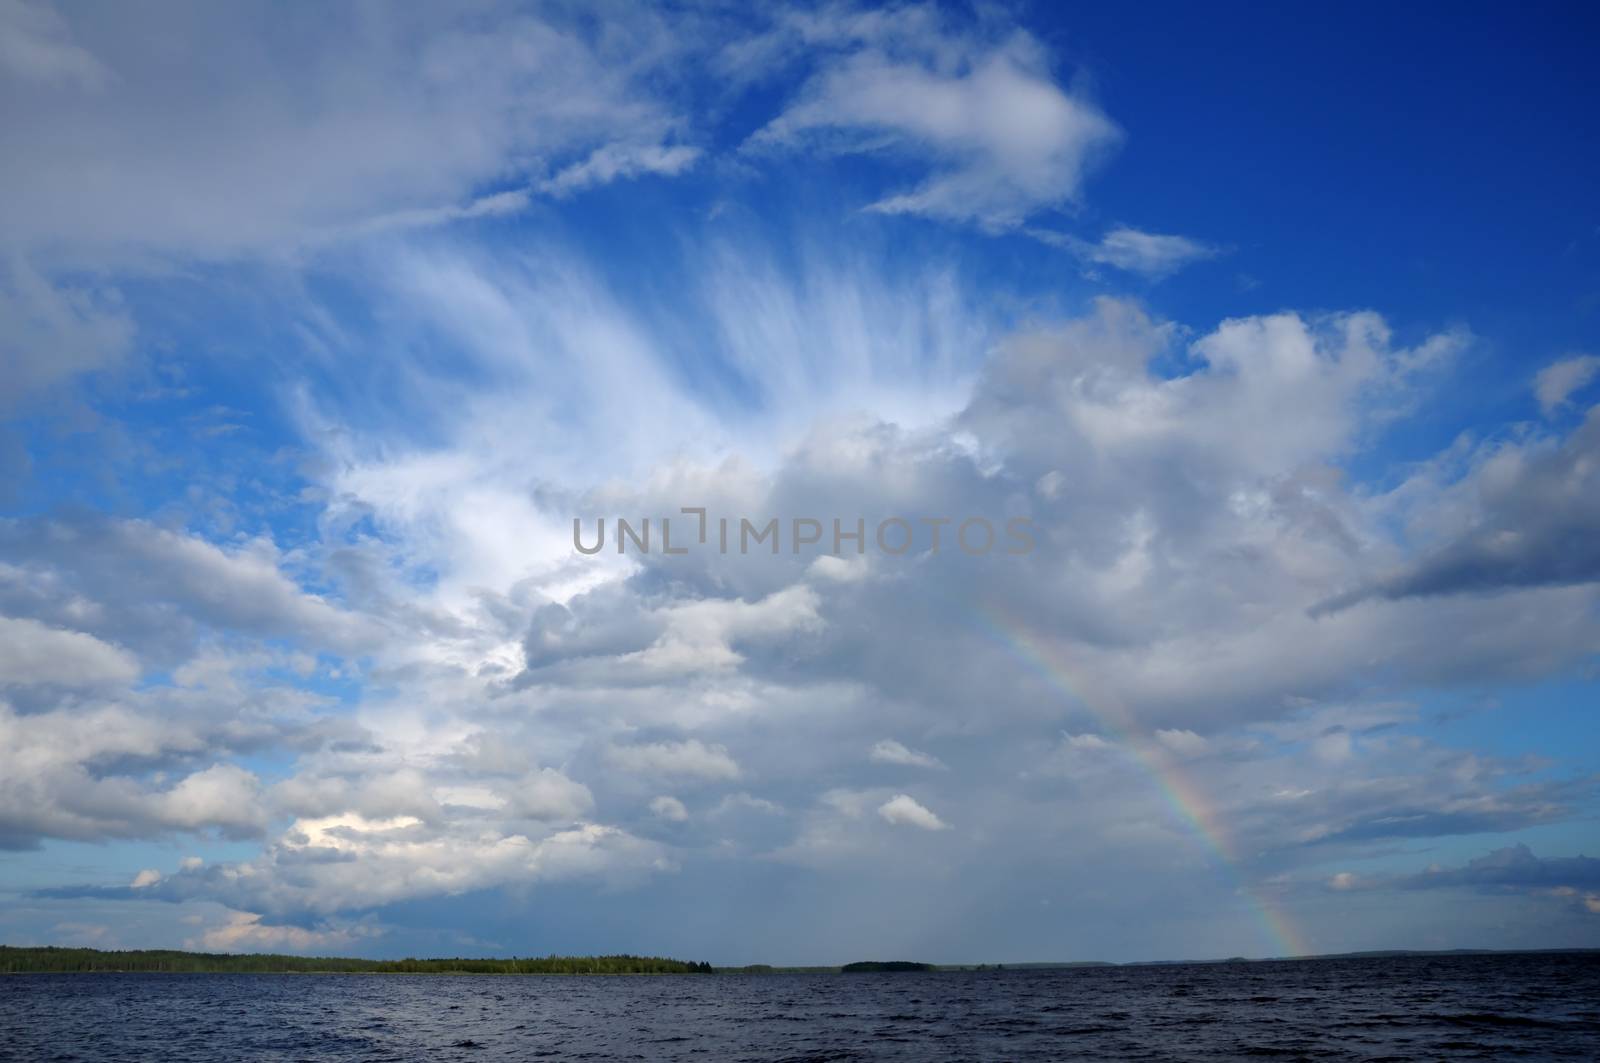 Video shows saturated and colorfull rainbow under beautiful cloud in the sky over lake's surface